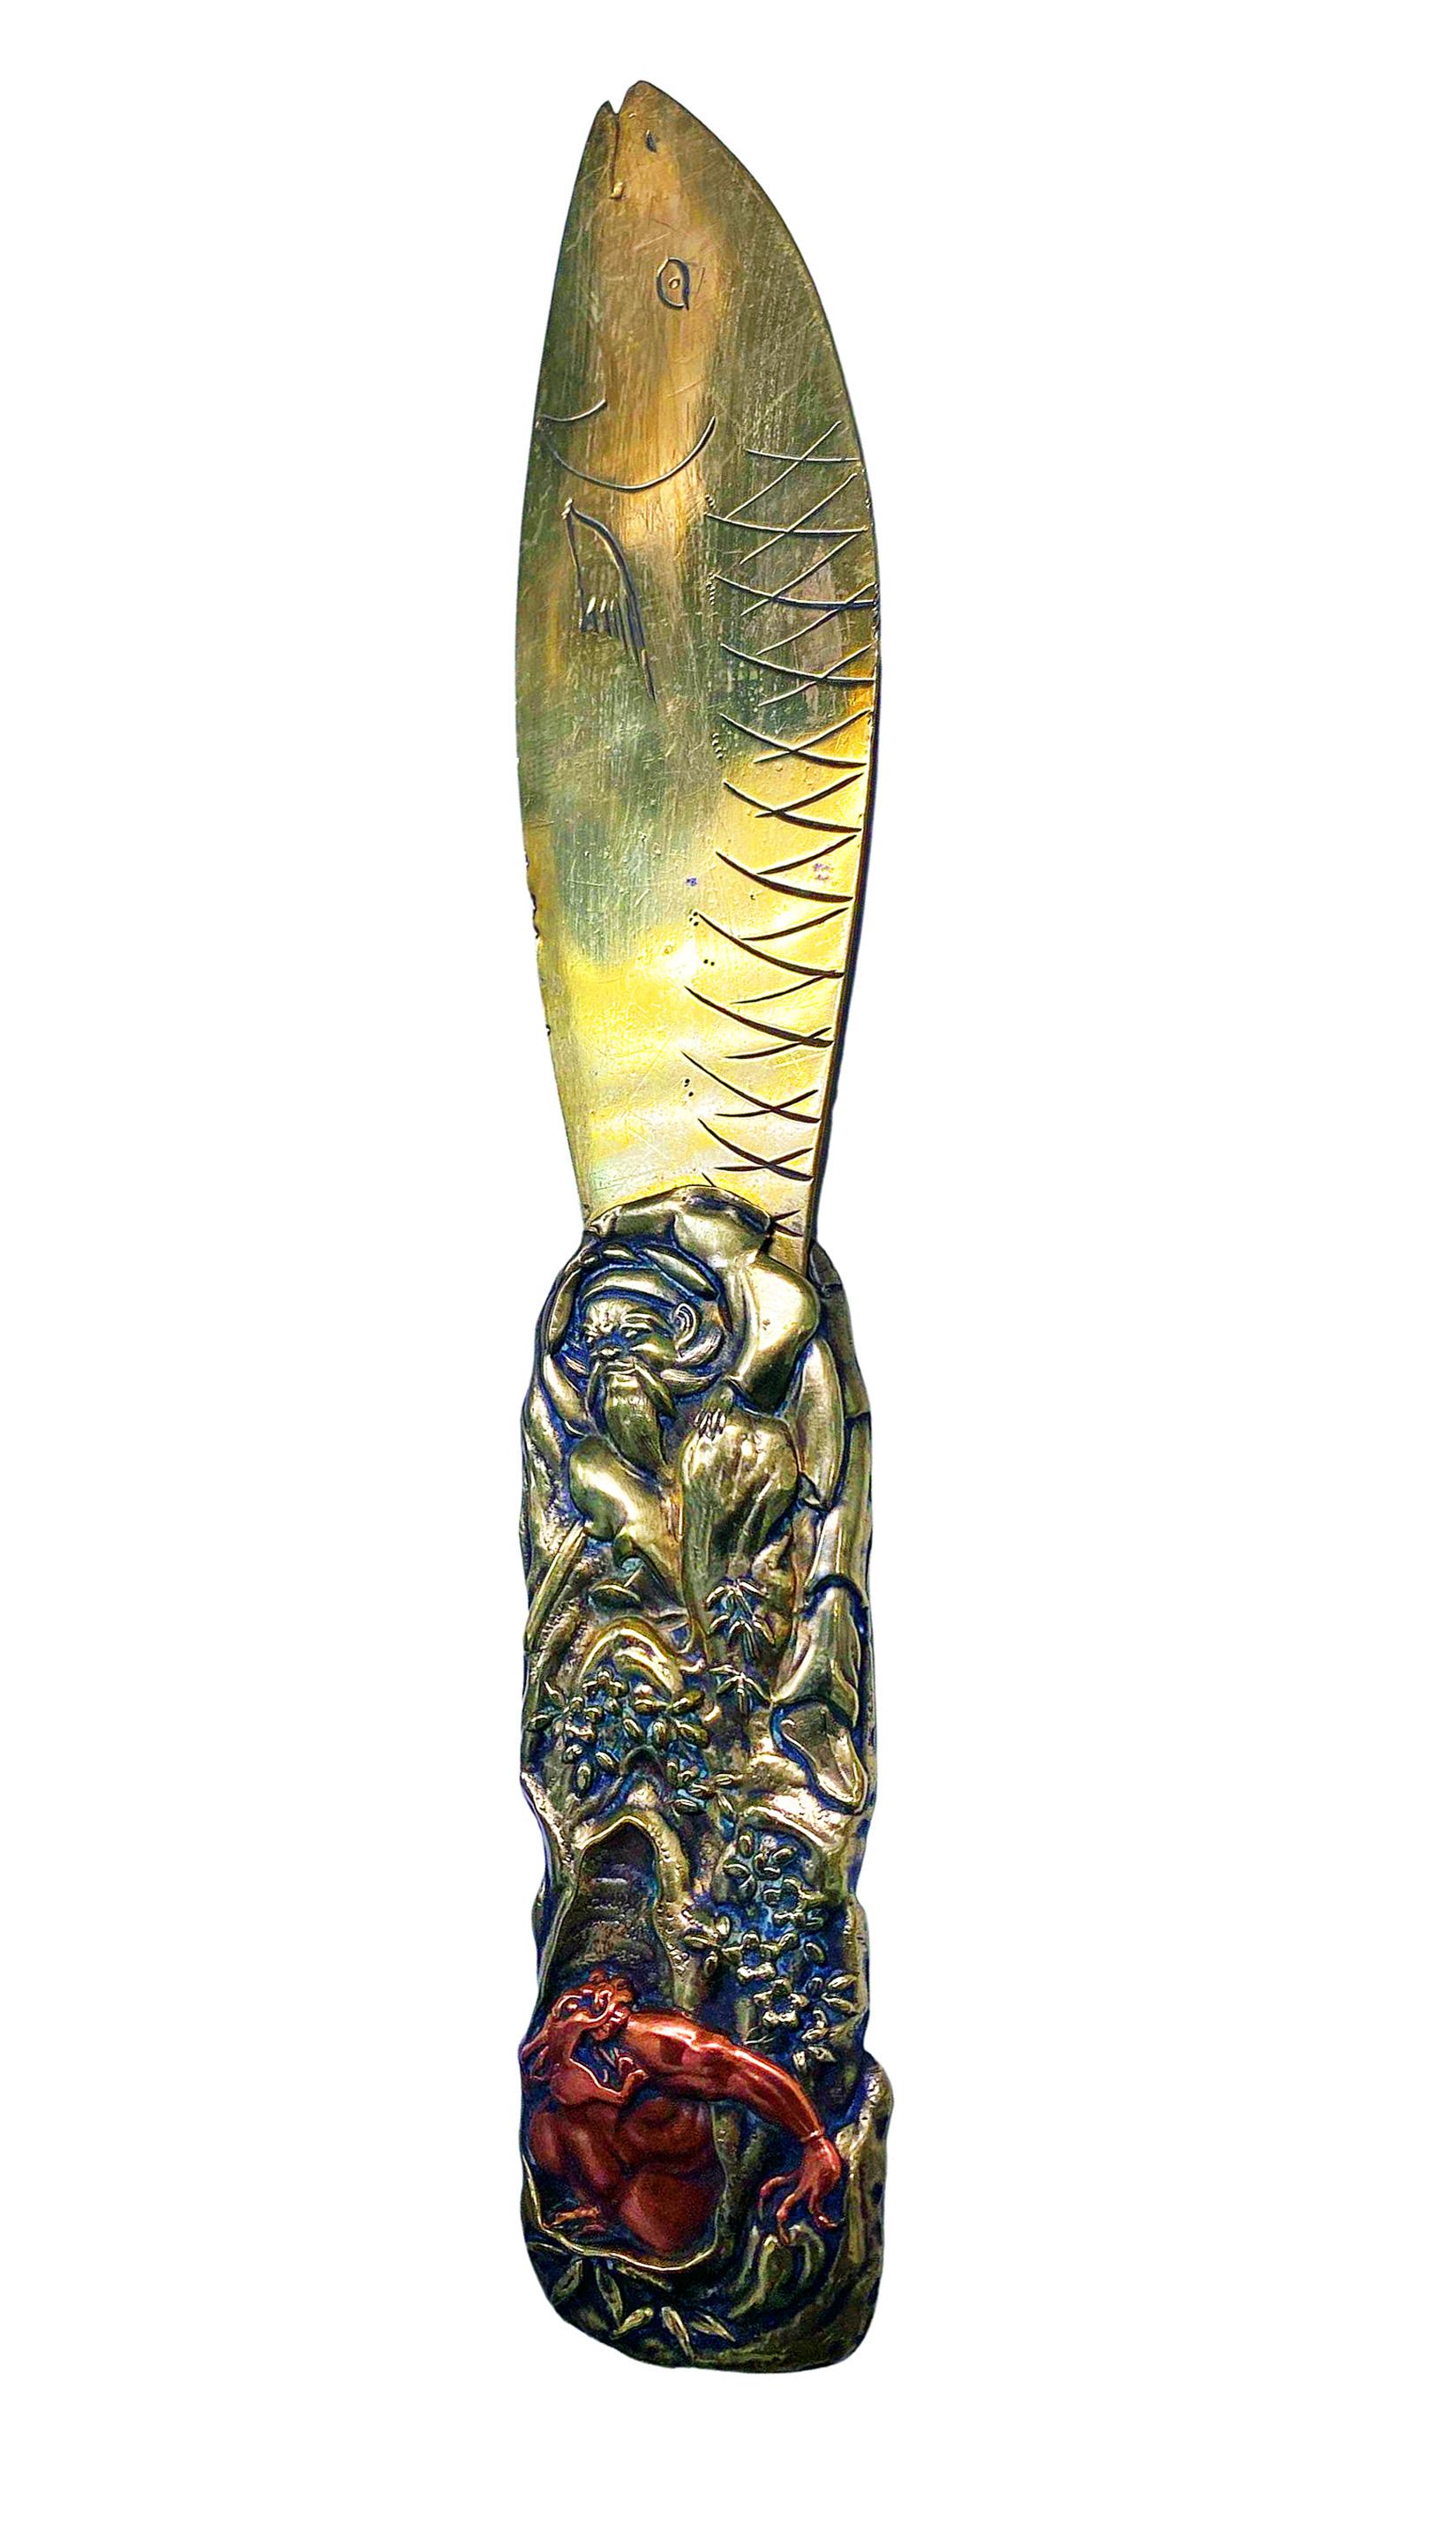 Japanese 19th century mixed metals, letter opener C.1880. The letter opener brass and copper mixed metals, blade in the form of a fish, the front handle depicting mythological figures, the reverse with chrysanthemums plant. Length: - 8.6 inches.